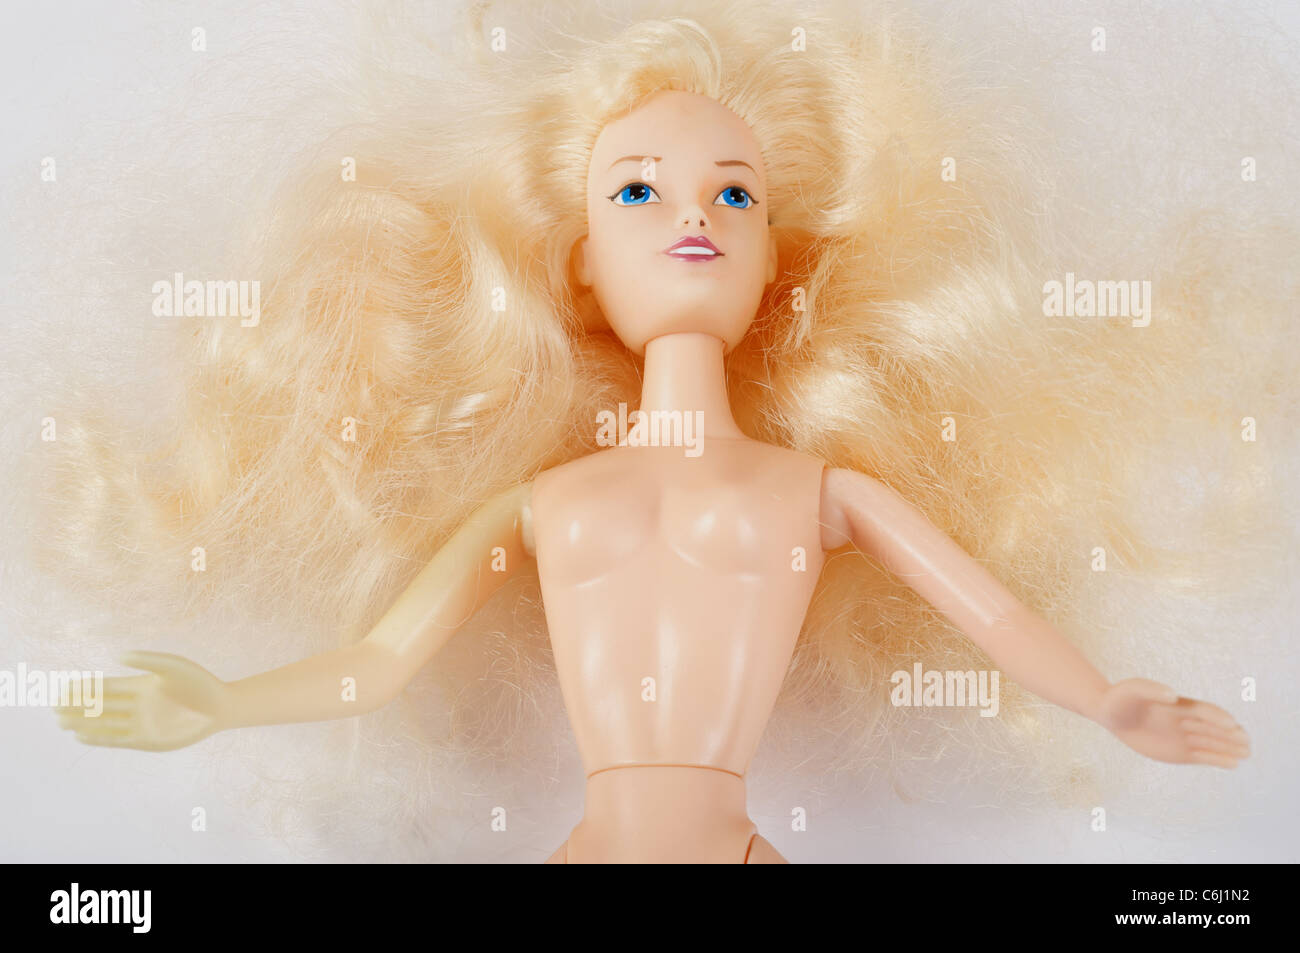 Zonsverduistering Atletisch In de naam Barbie' lookalike toy doll made in China by Simba toys Stock Photo - Alamy